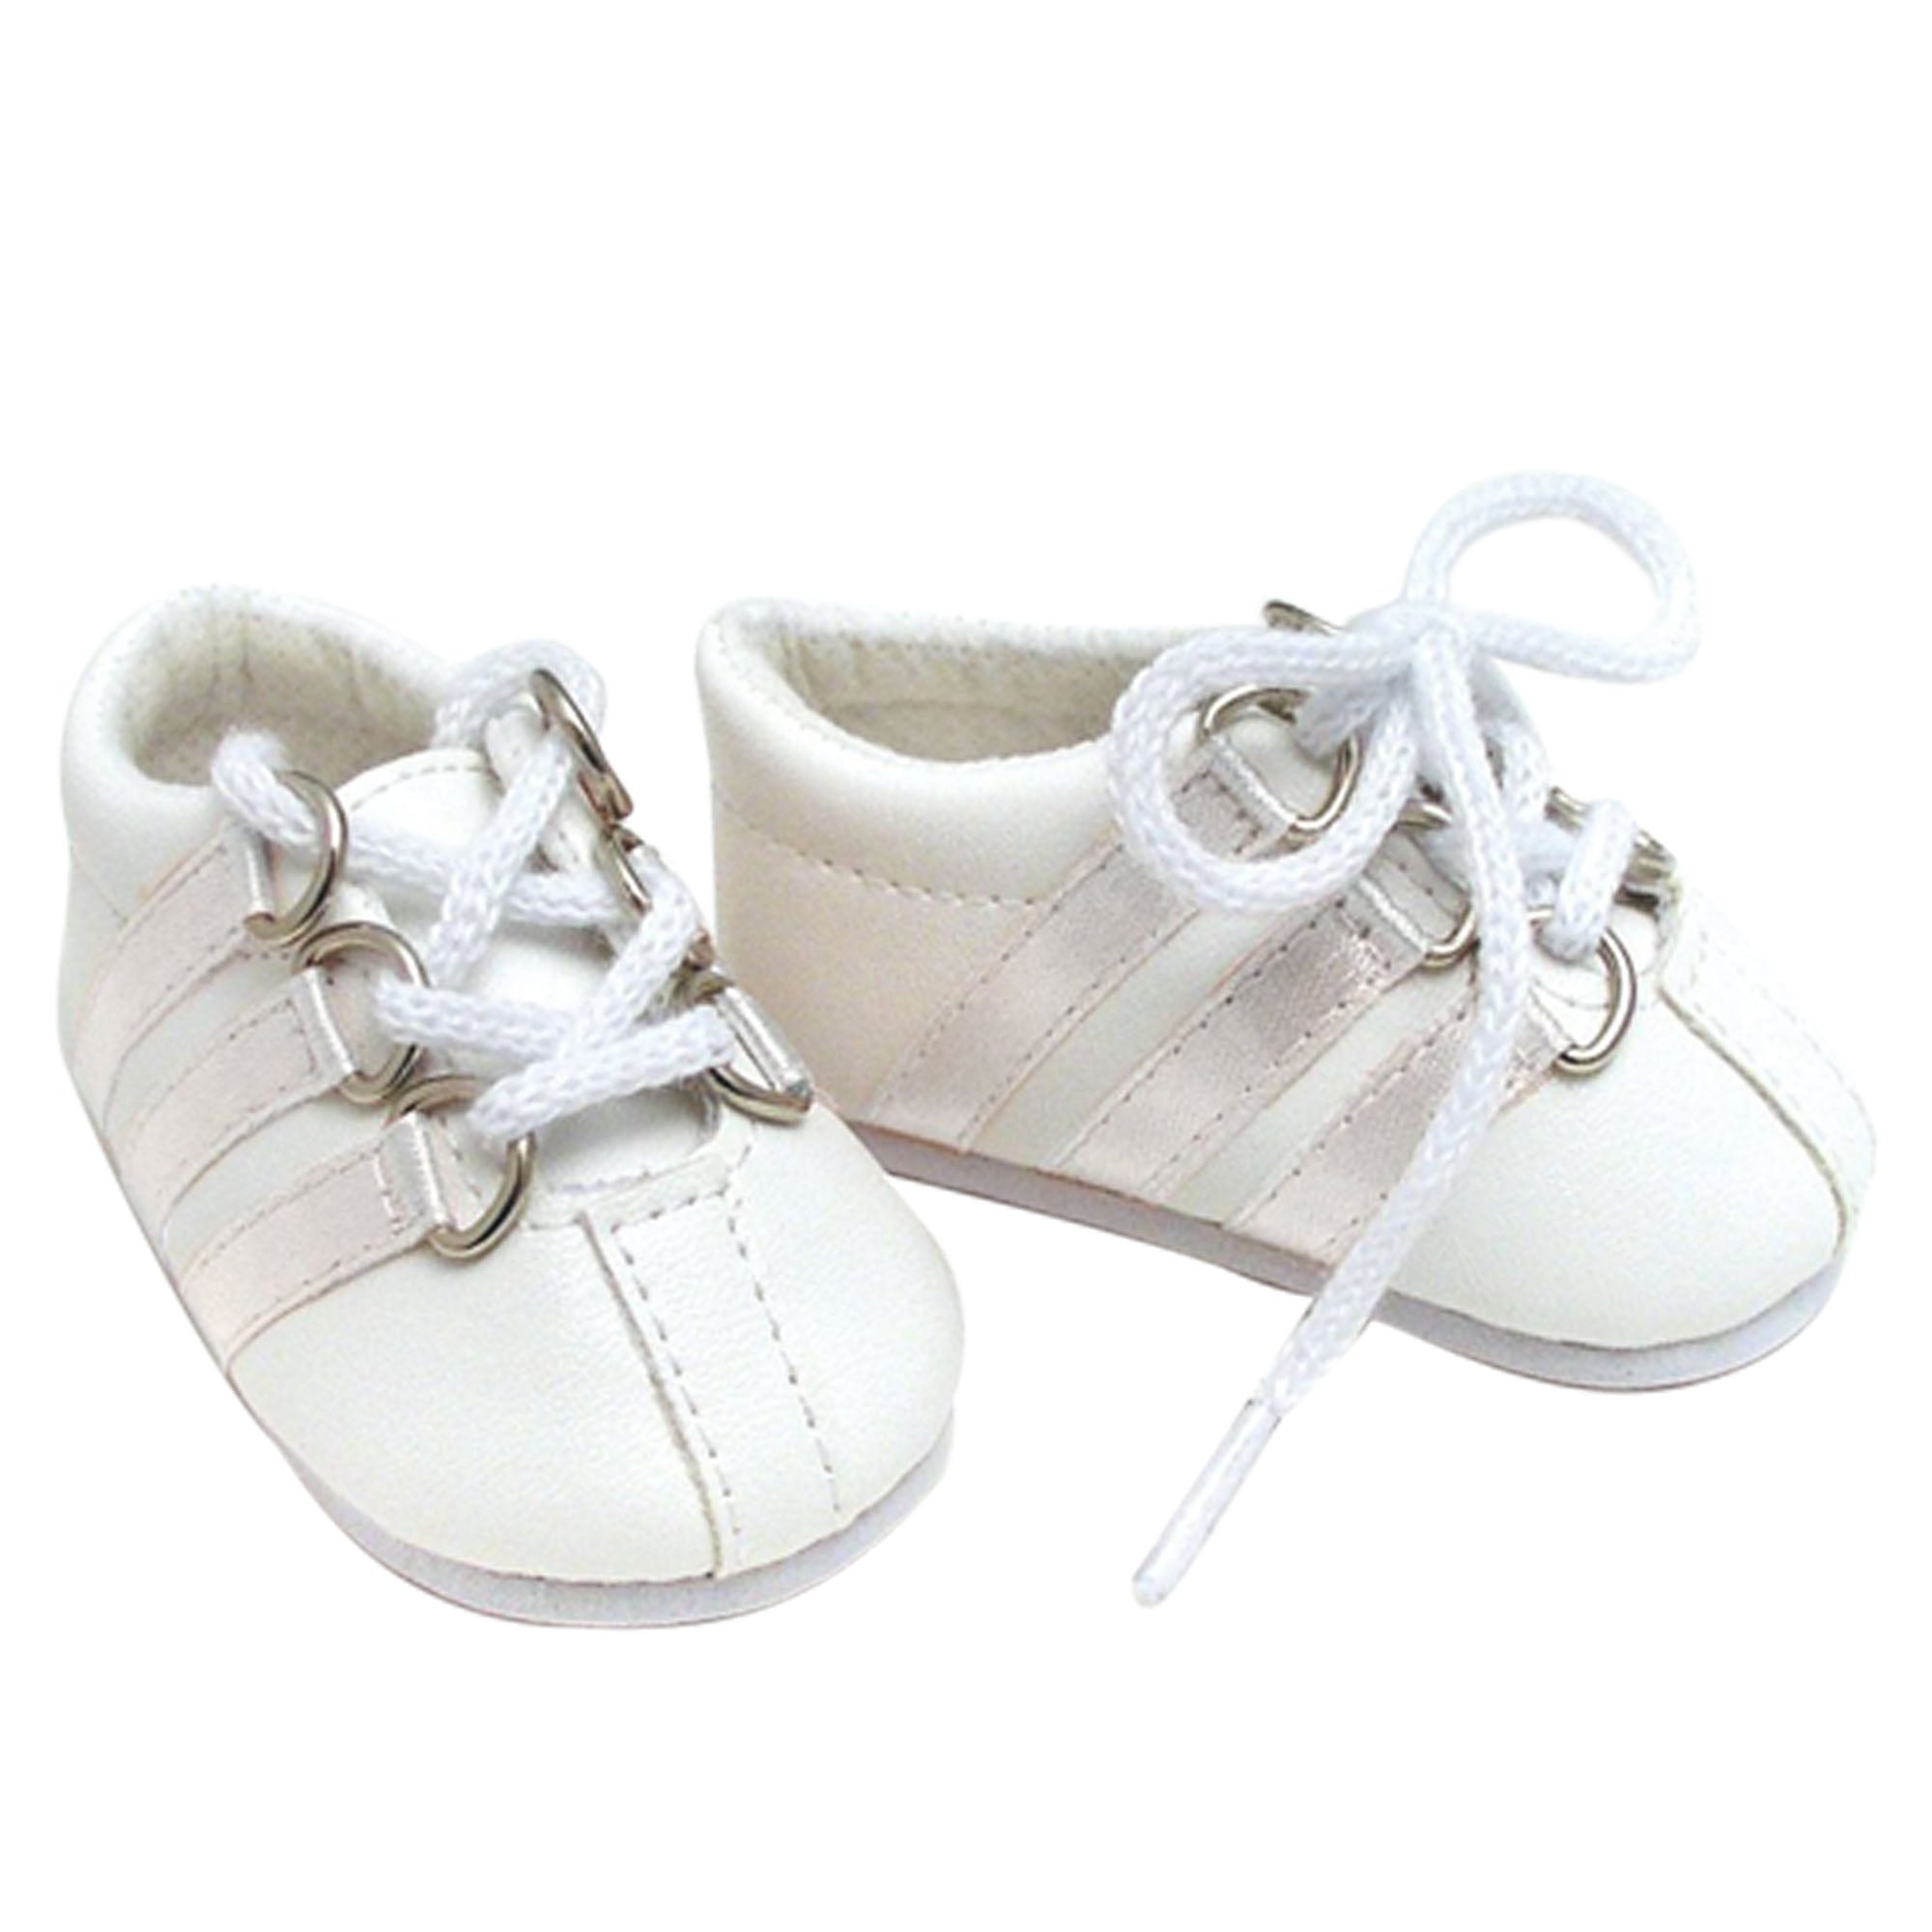 Sophia’s Stylish Solid-Colored Mix & Match Gender-Neutral Lace-Up Leather Tennis Shoe Sneakers for 18” Dolls, White